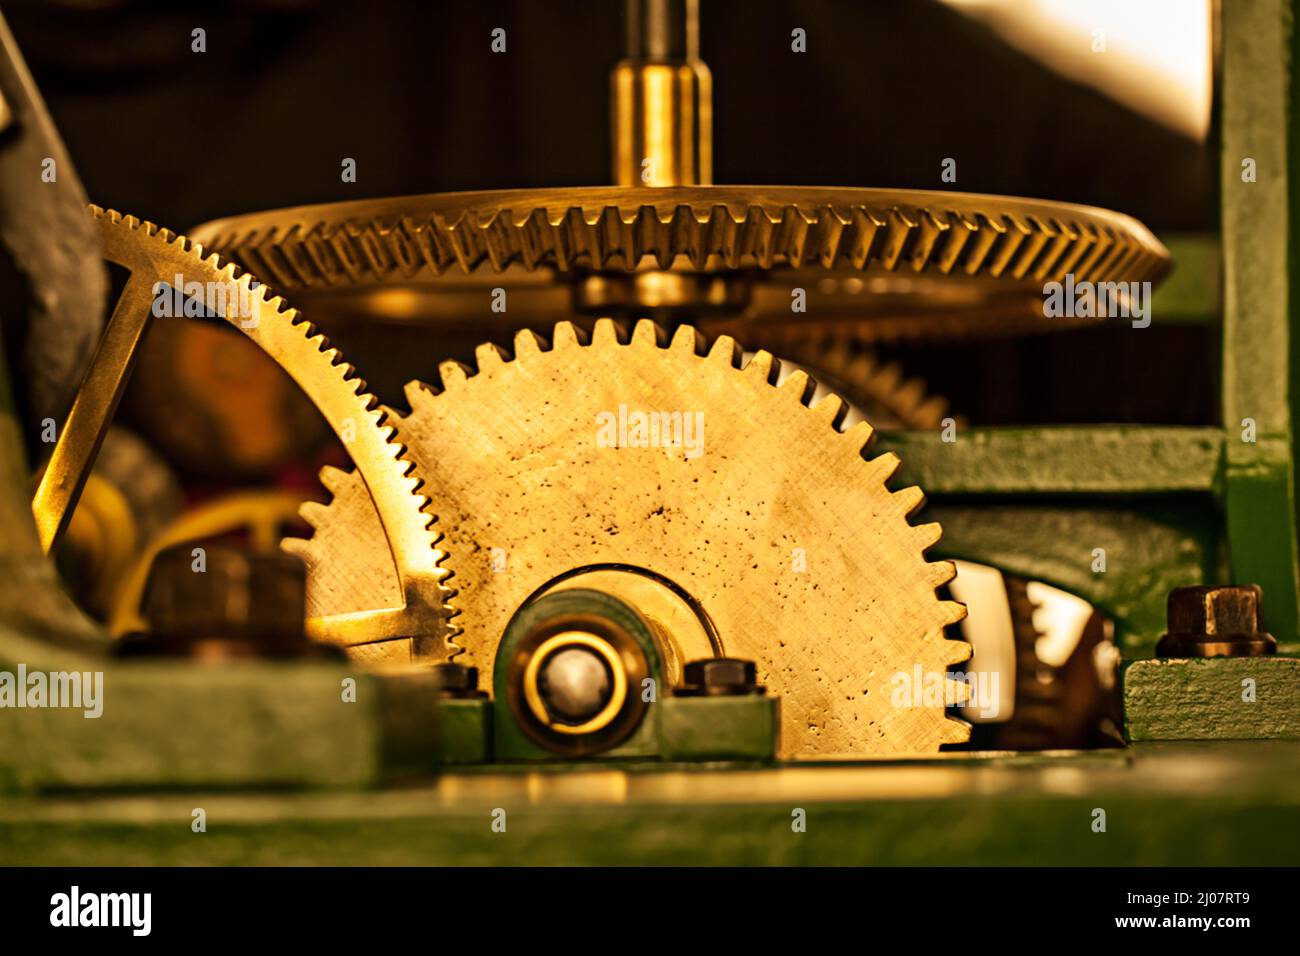 Timeless heritage. Shiny toothed gears of a large clock. Stock Photo